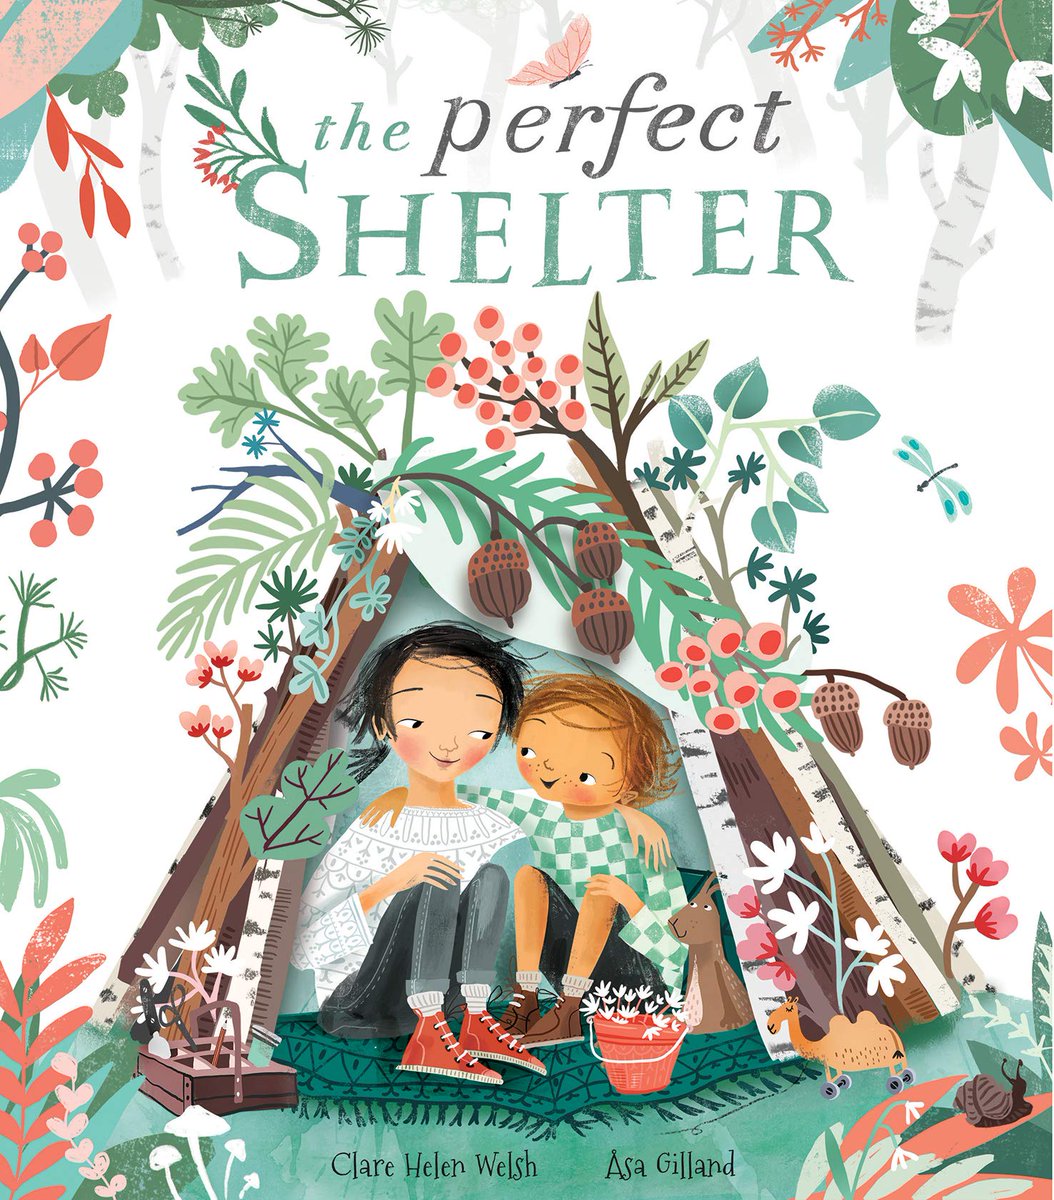 There’s hope & comfort for children facing serious illness of a loved one in @ClareHelenWelsh & @AsaGilland’s beautiful picture book  #ThePerfectShelter @Leilah_Makes @LittleTigerUK pamnorfolkblog.blogspot.com